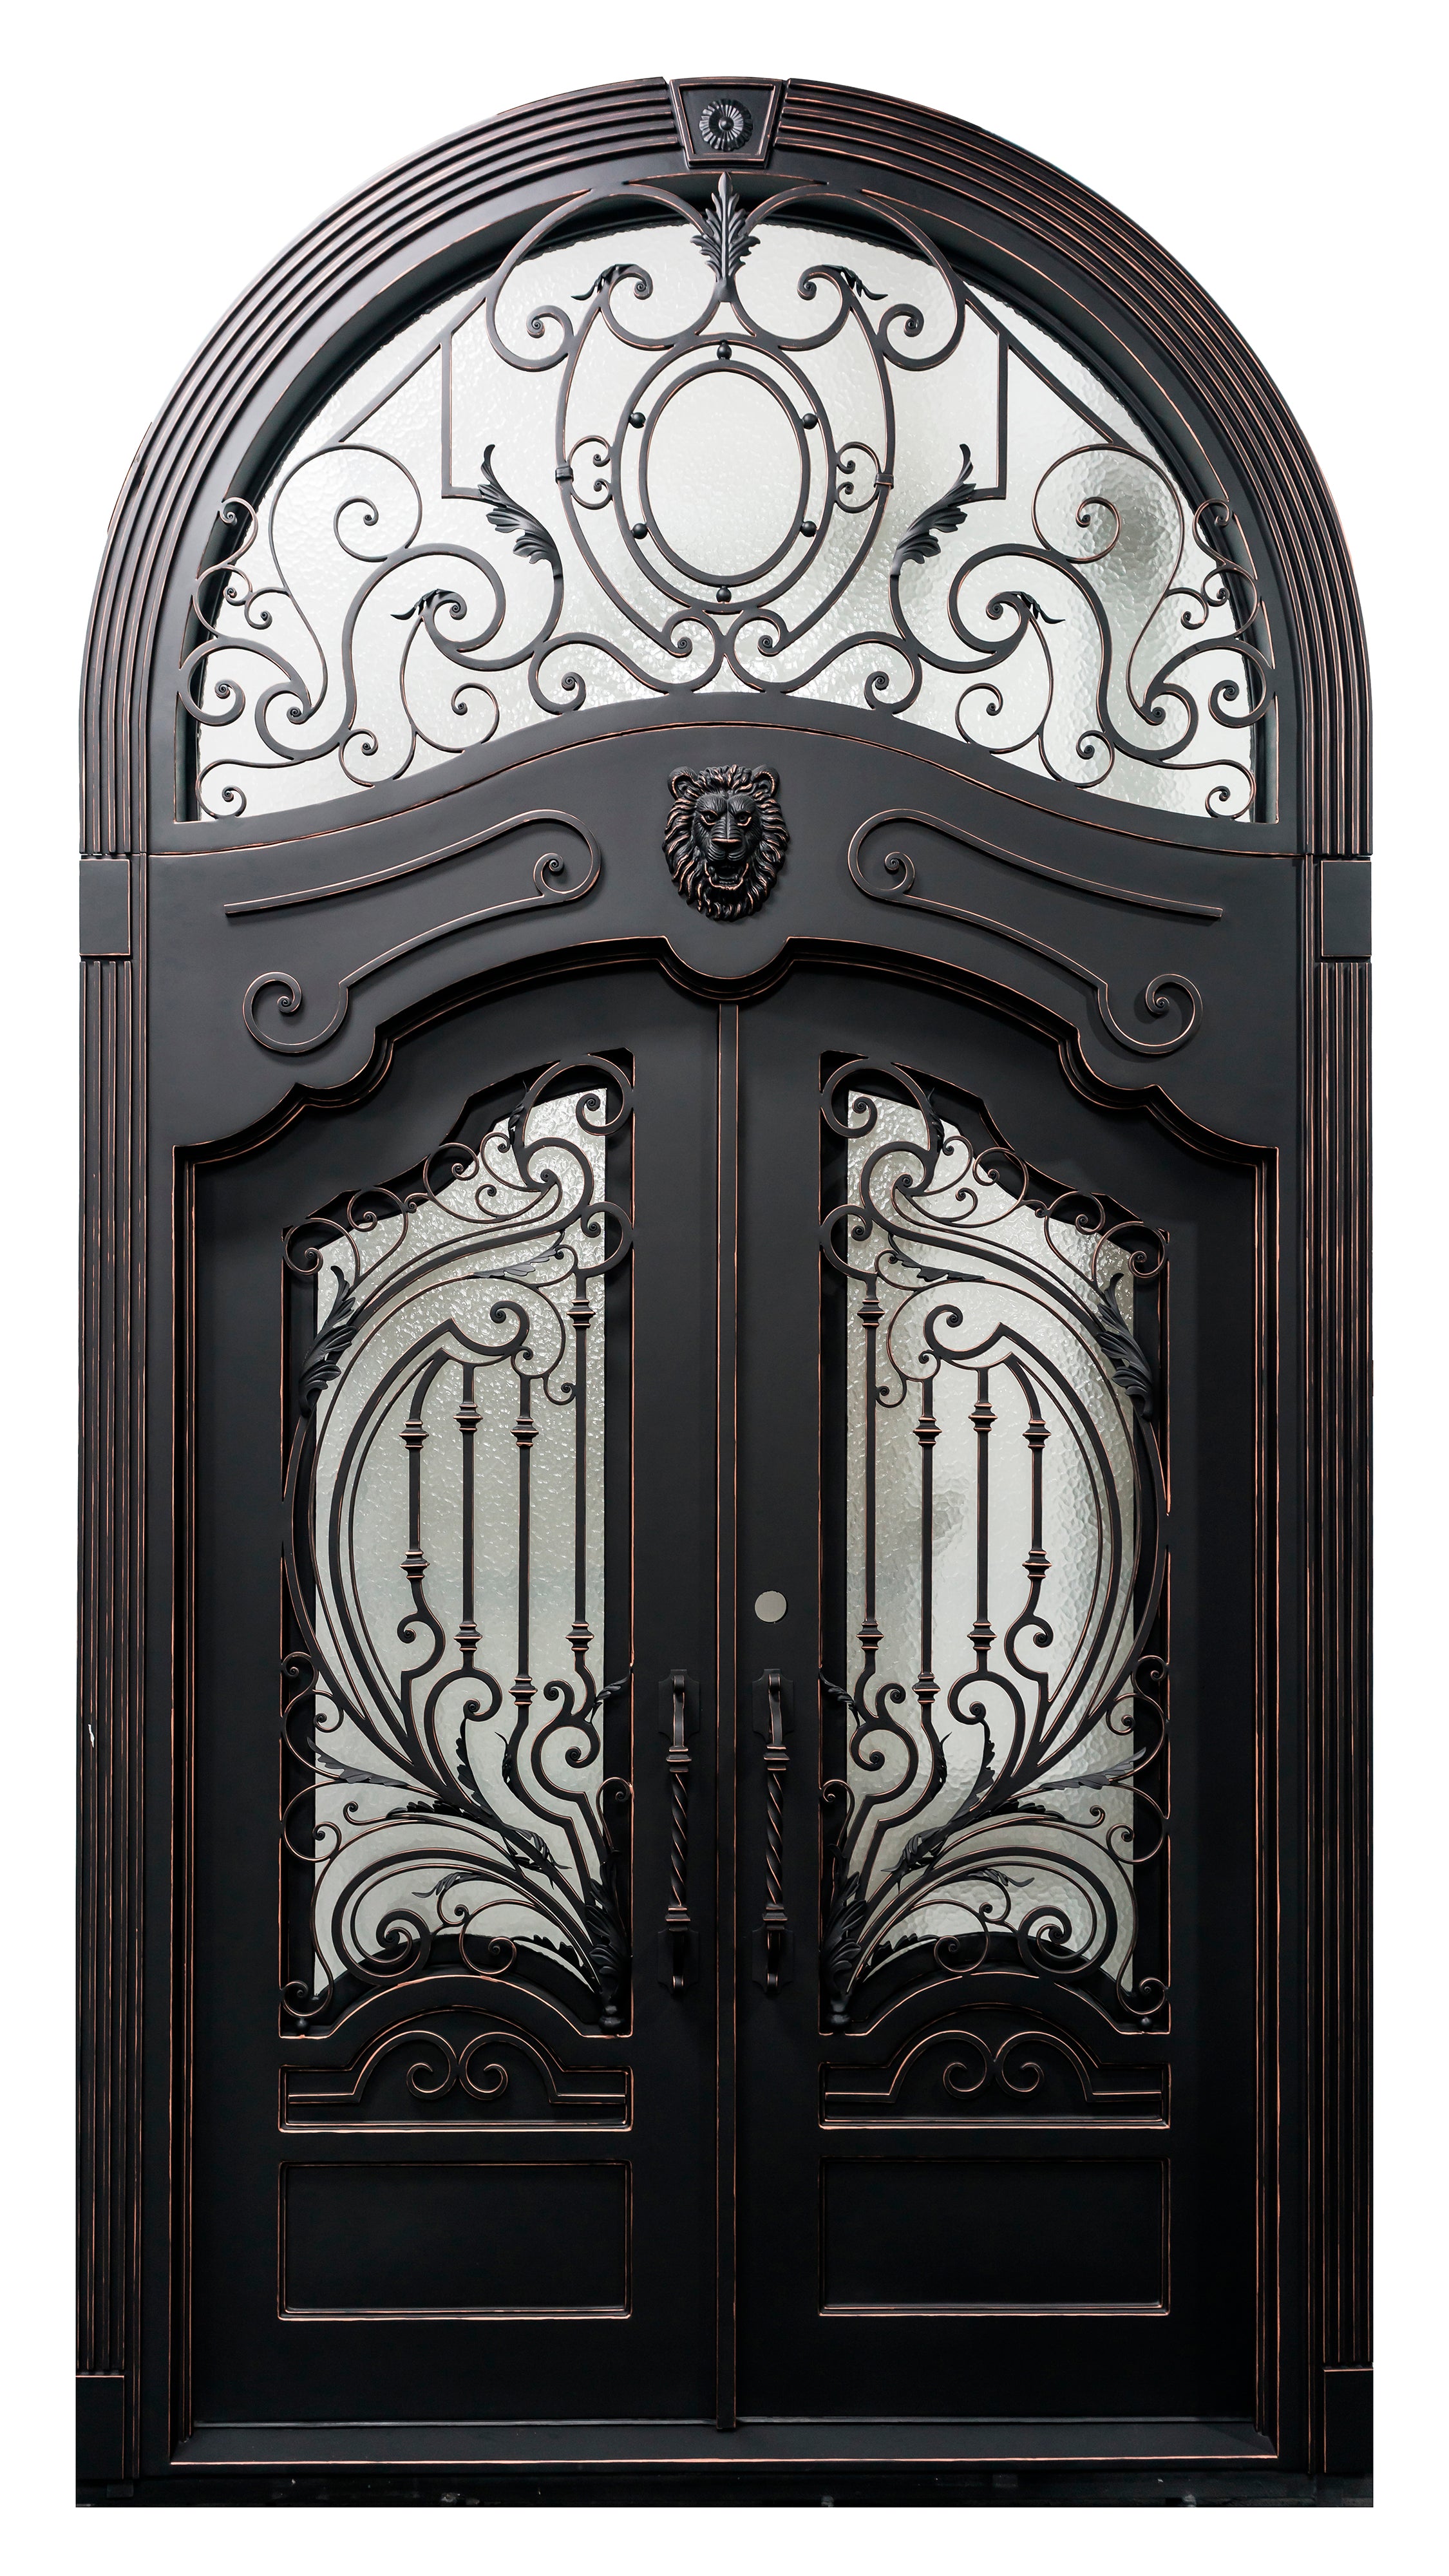 Brady Model Front Entry Door With Transom 72 By 144 Matt Black With Copper Finish